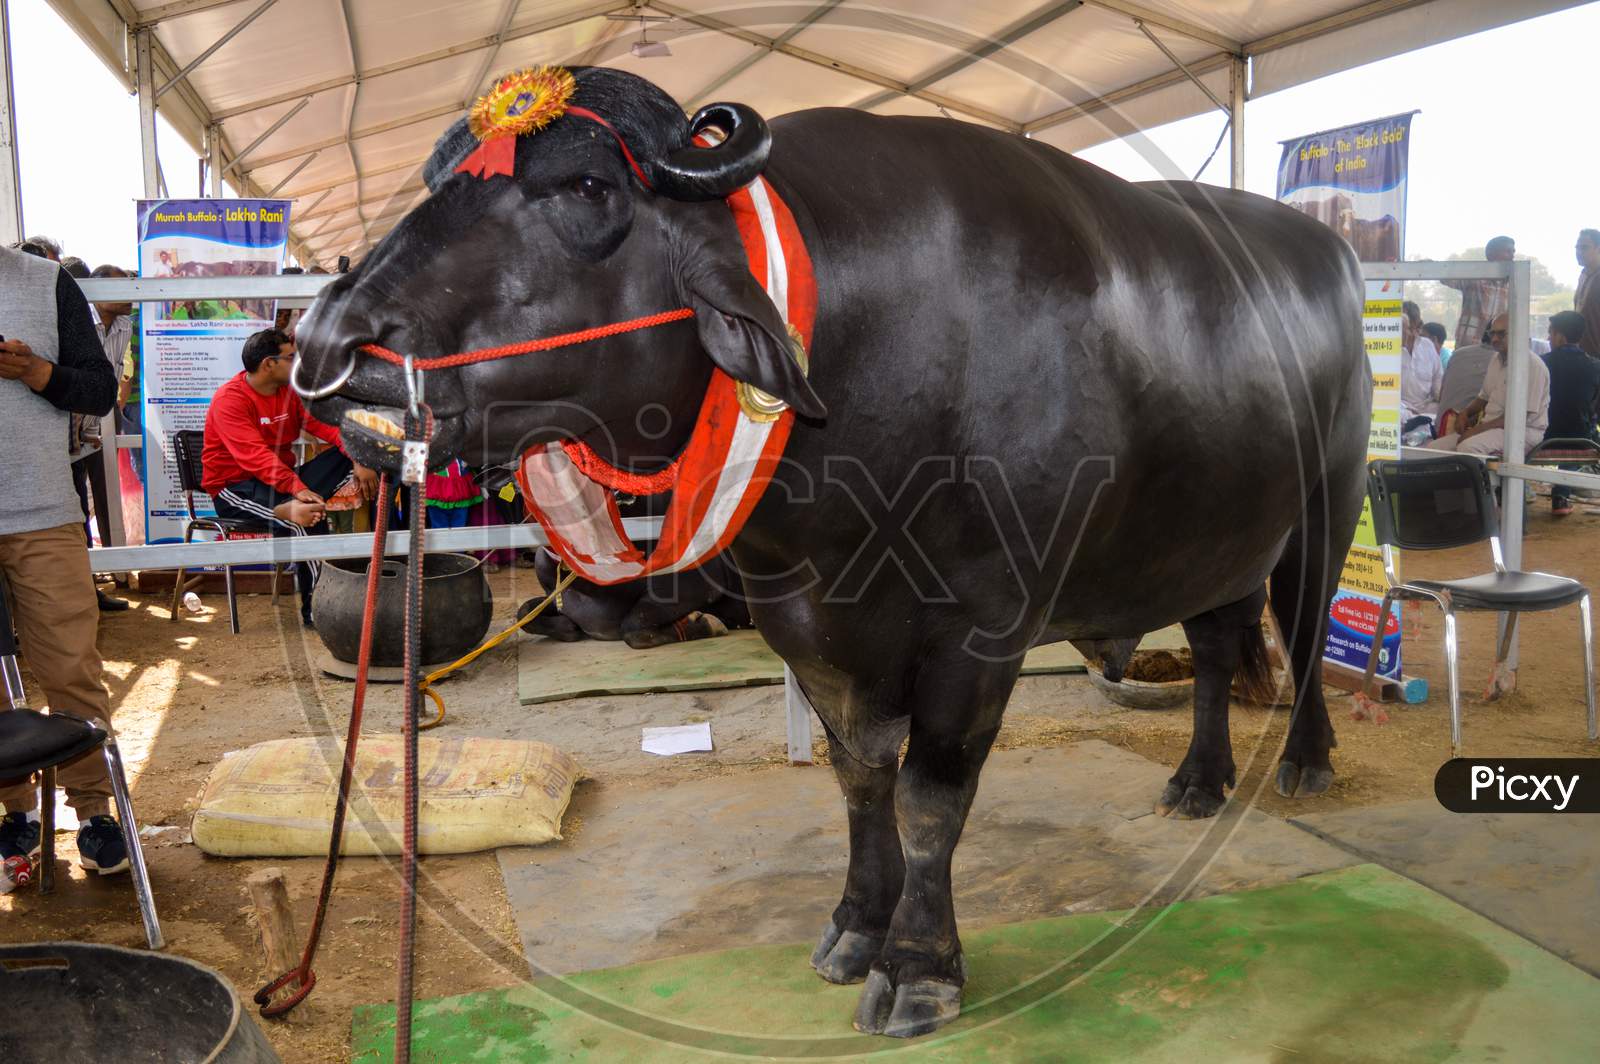 The Big Indian Male Buffalo Who Is Showcasing For Agriculture Fair, This Big Male Indian Buffalo Is So Rich,His Fertility Is So Good To Produce Baby Buffalo, Clean Shaved And Need Massage Everyday.